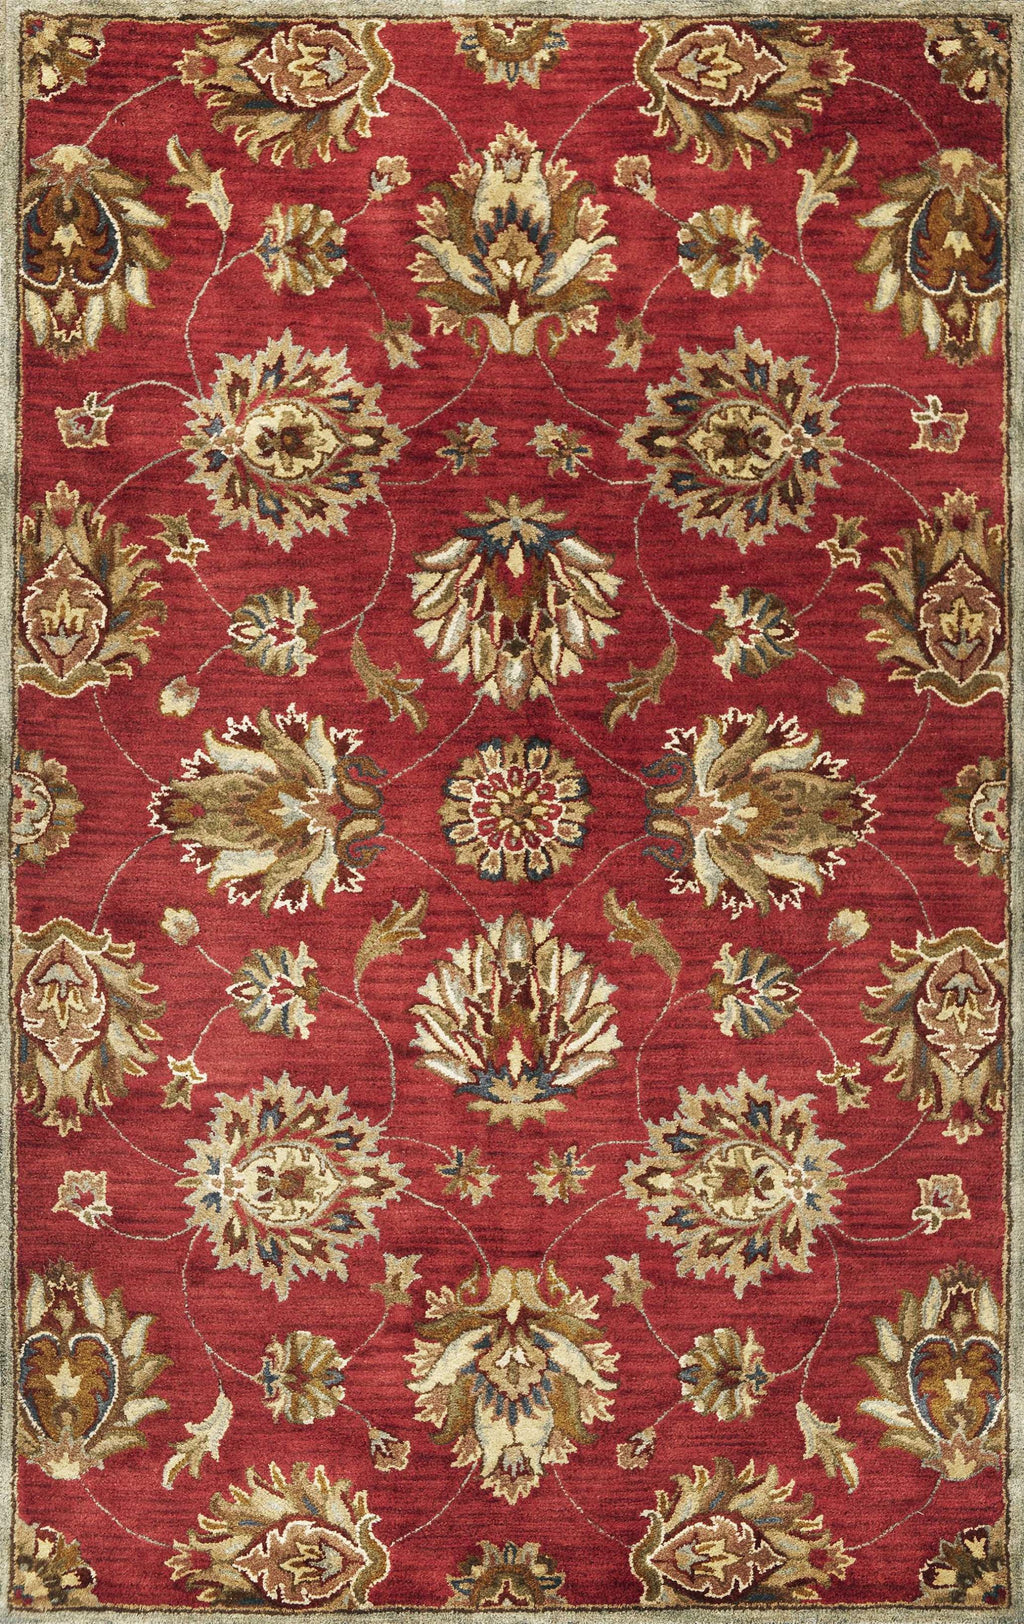 5' x 8' Wool Red Area Rug